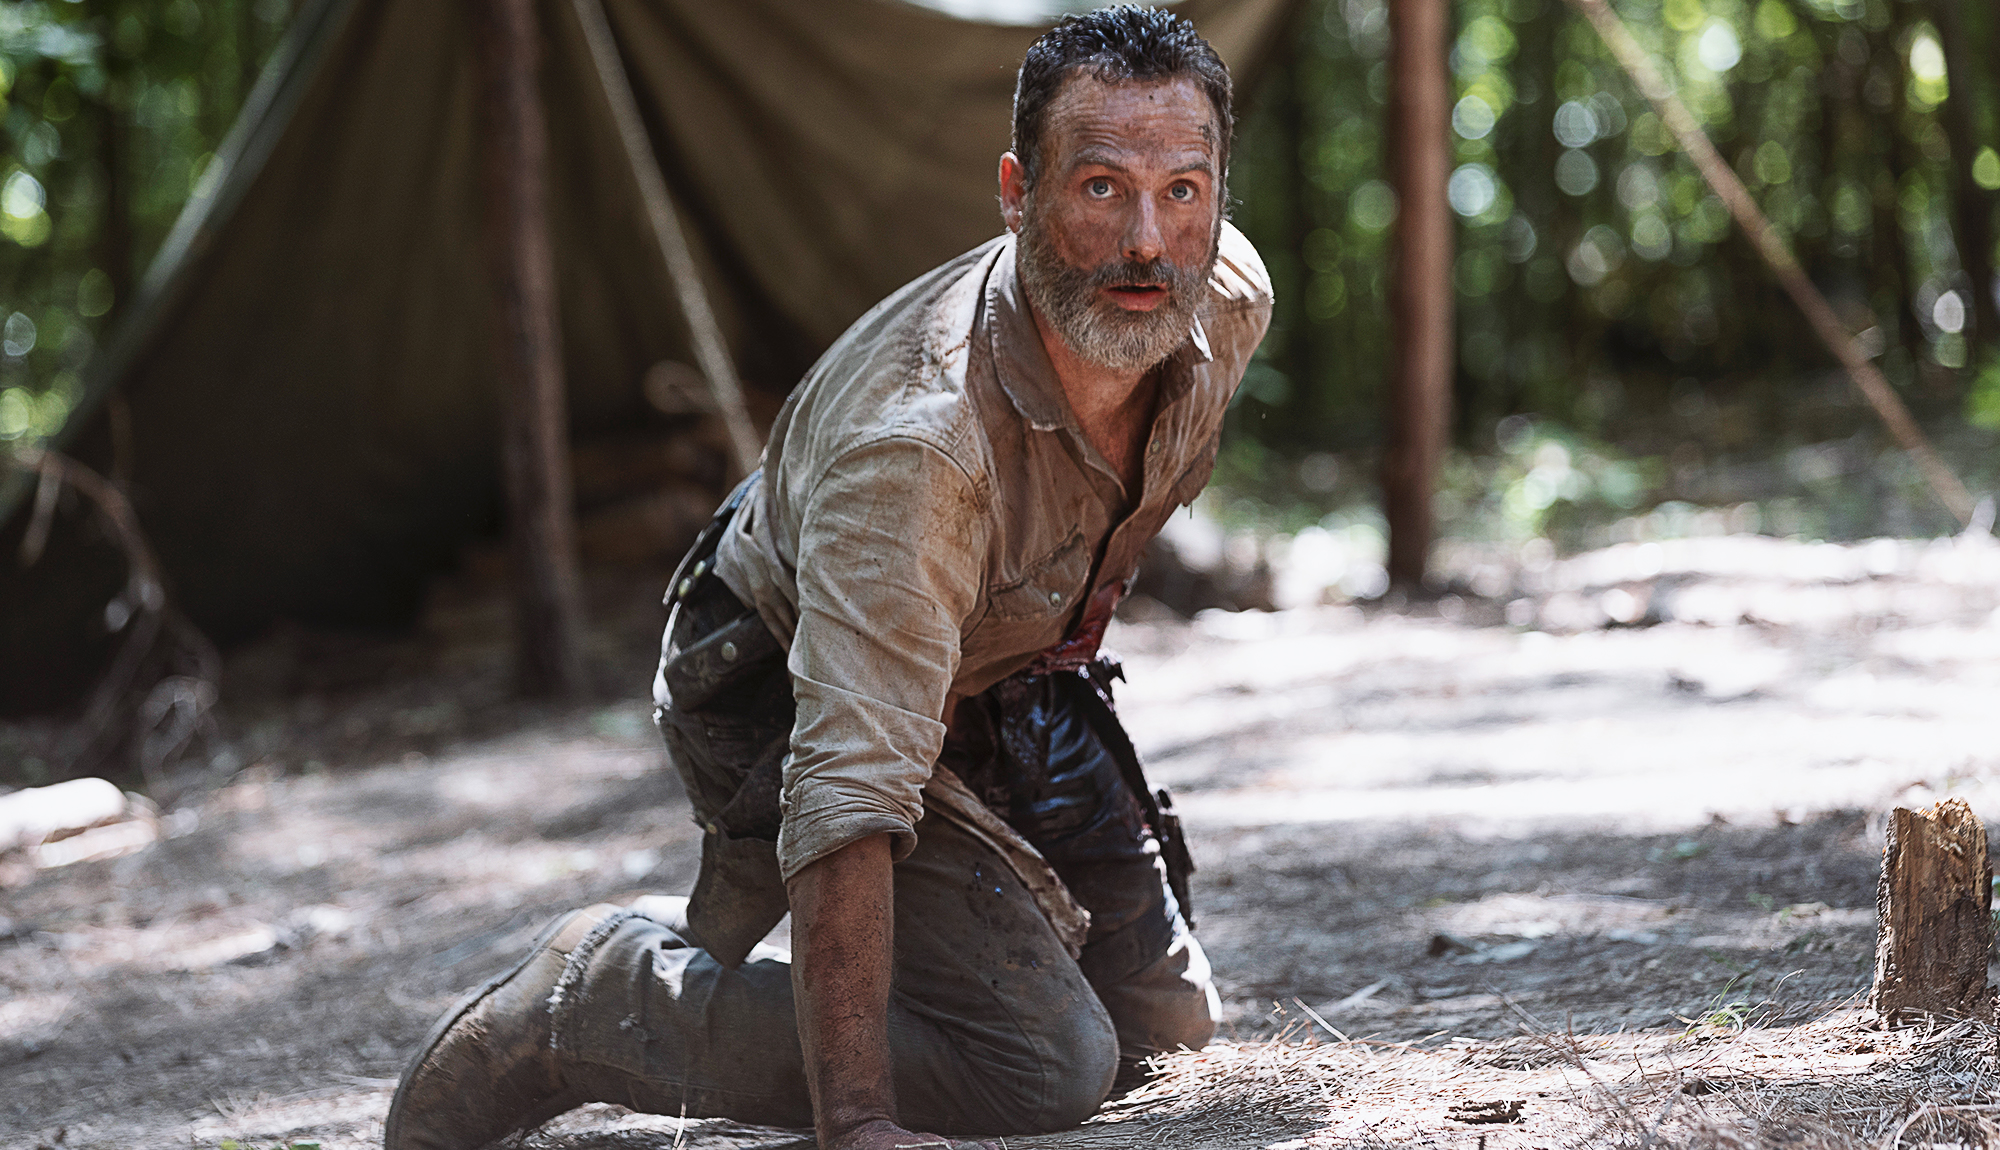 Scott Gimple Says The Rick Grimes Movies Will Introduce “A Brand New World”